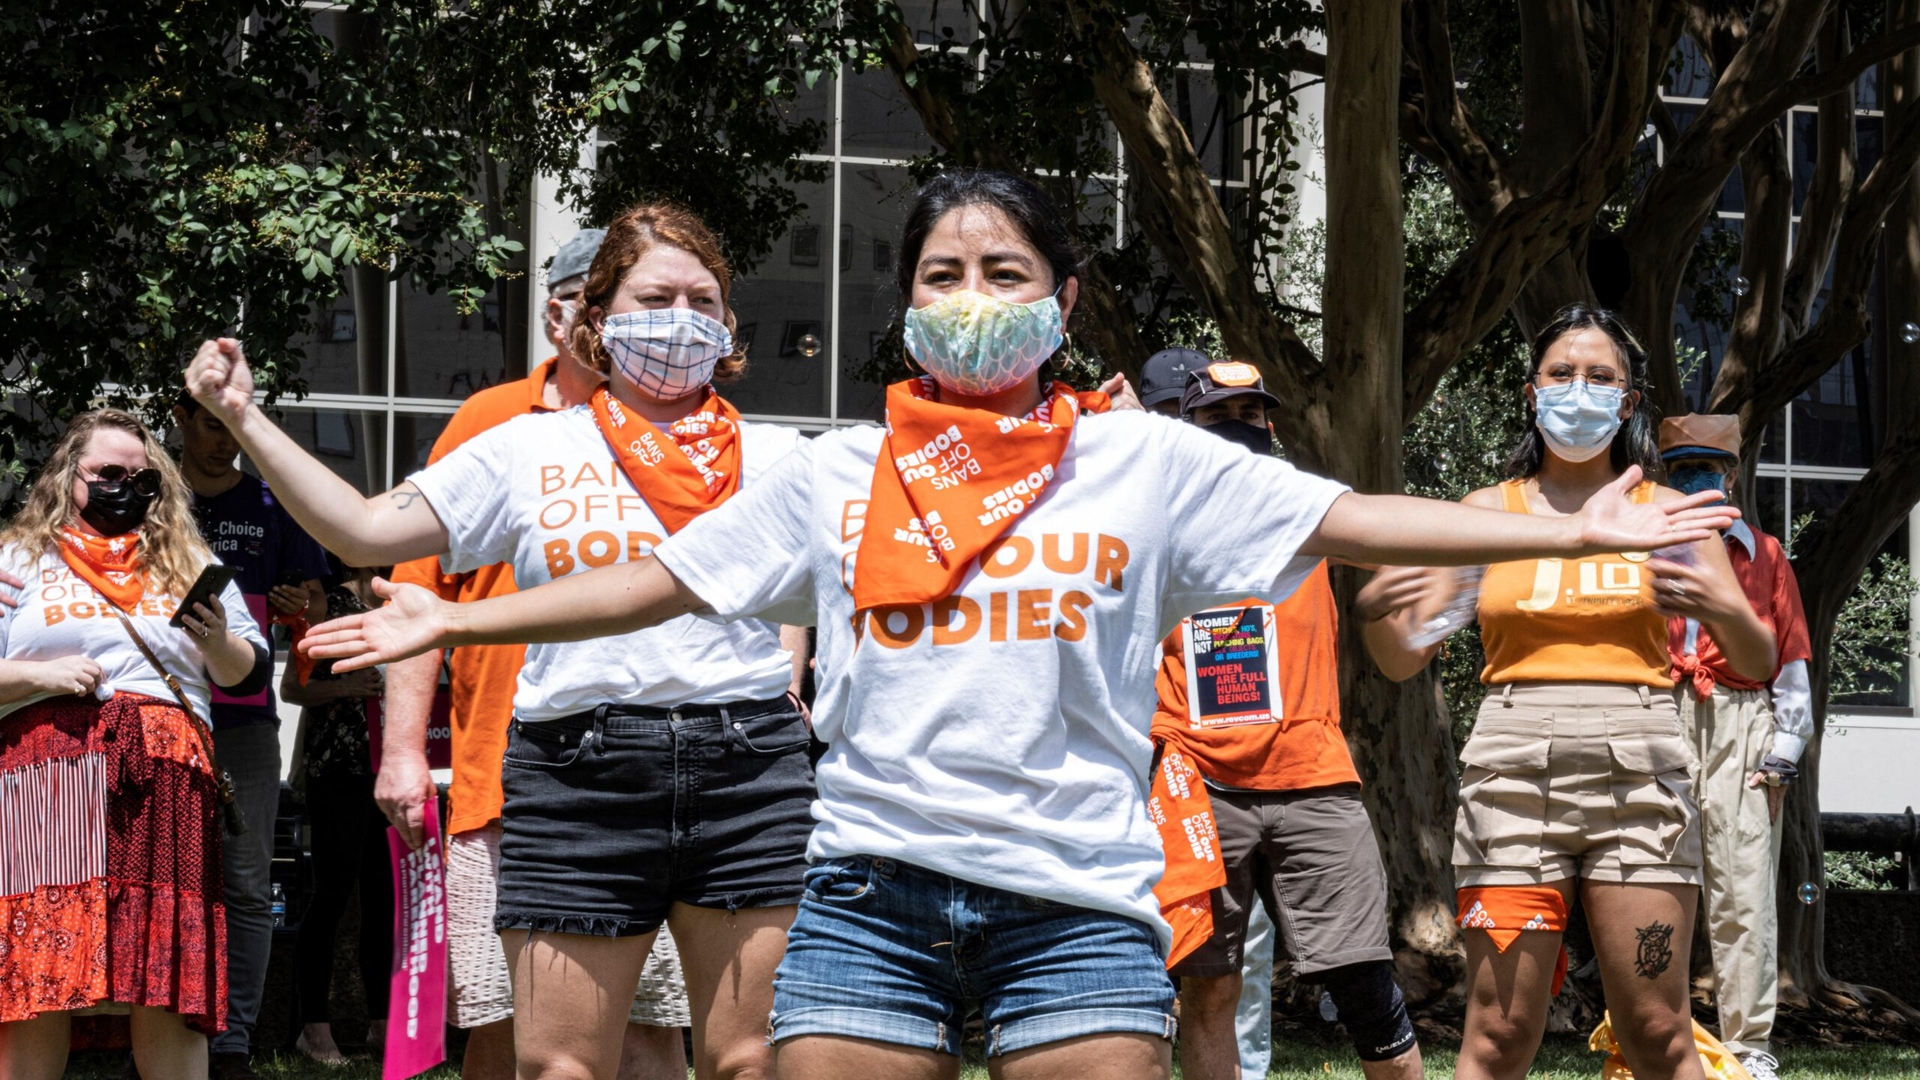 Activists protest in Texas cities against law restricting abortion